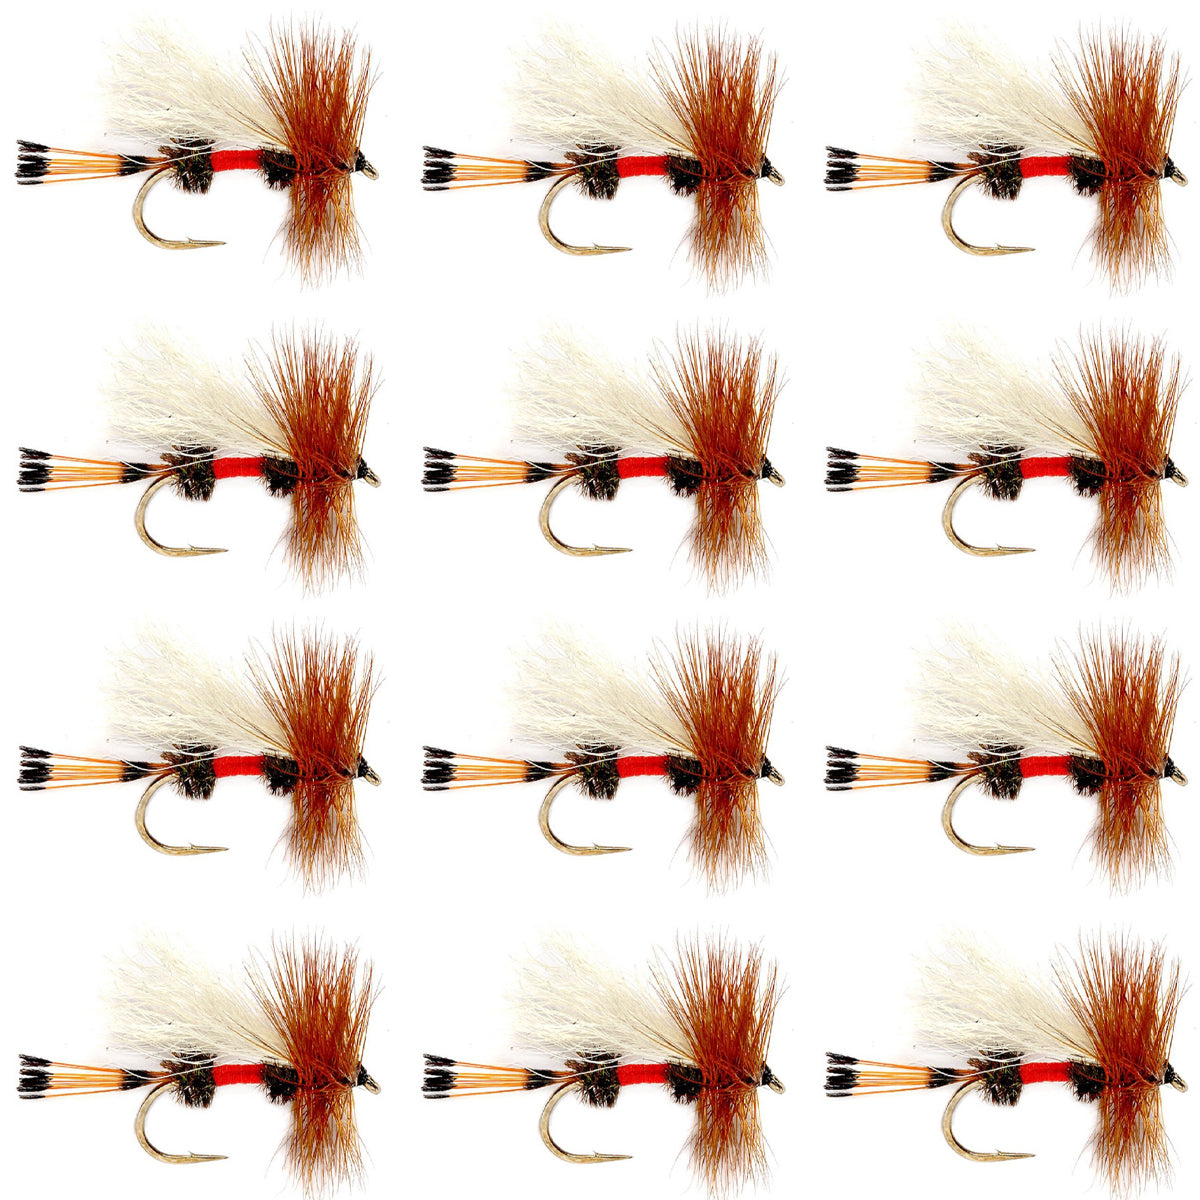 Royal Trude Classic Hair Wing Dry Fly - 1 Dozen Flies Hook Size 16